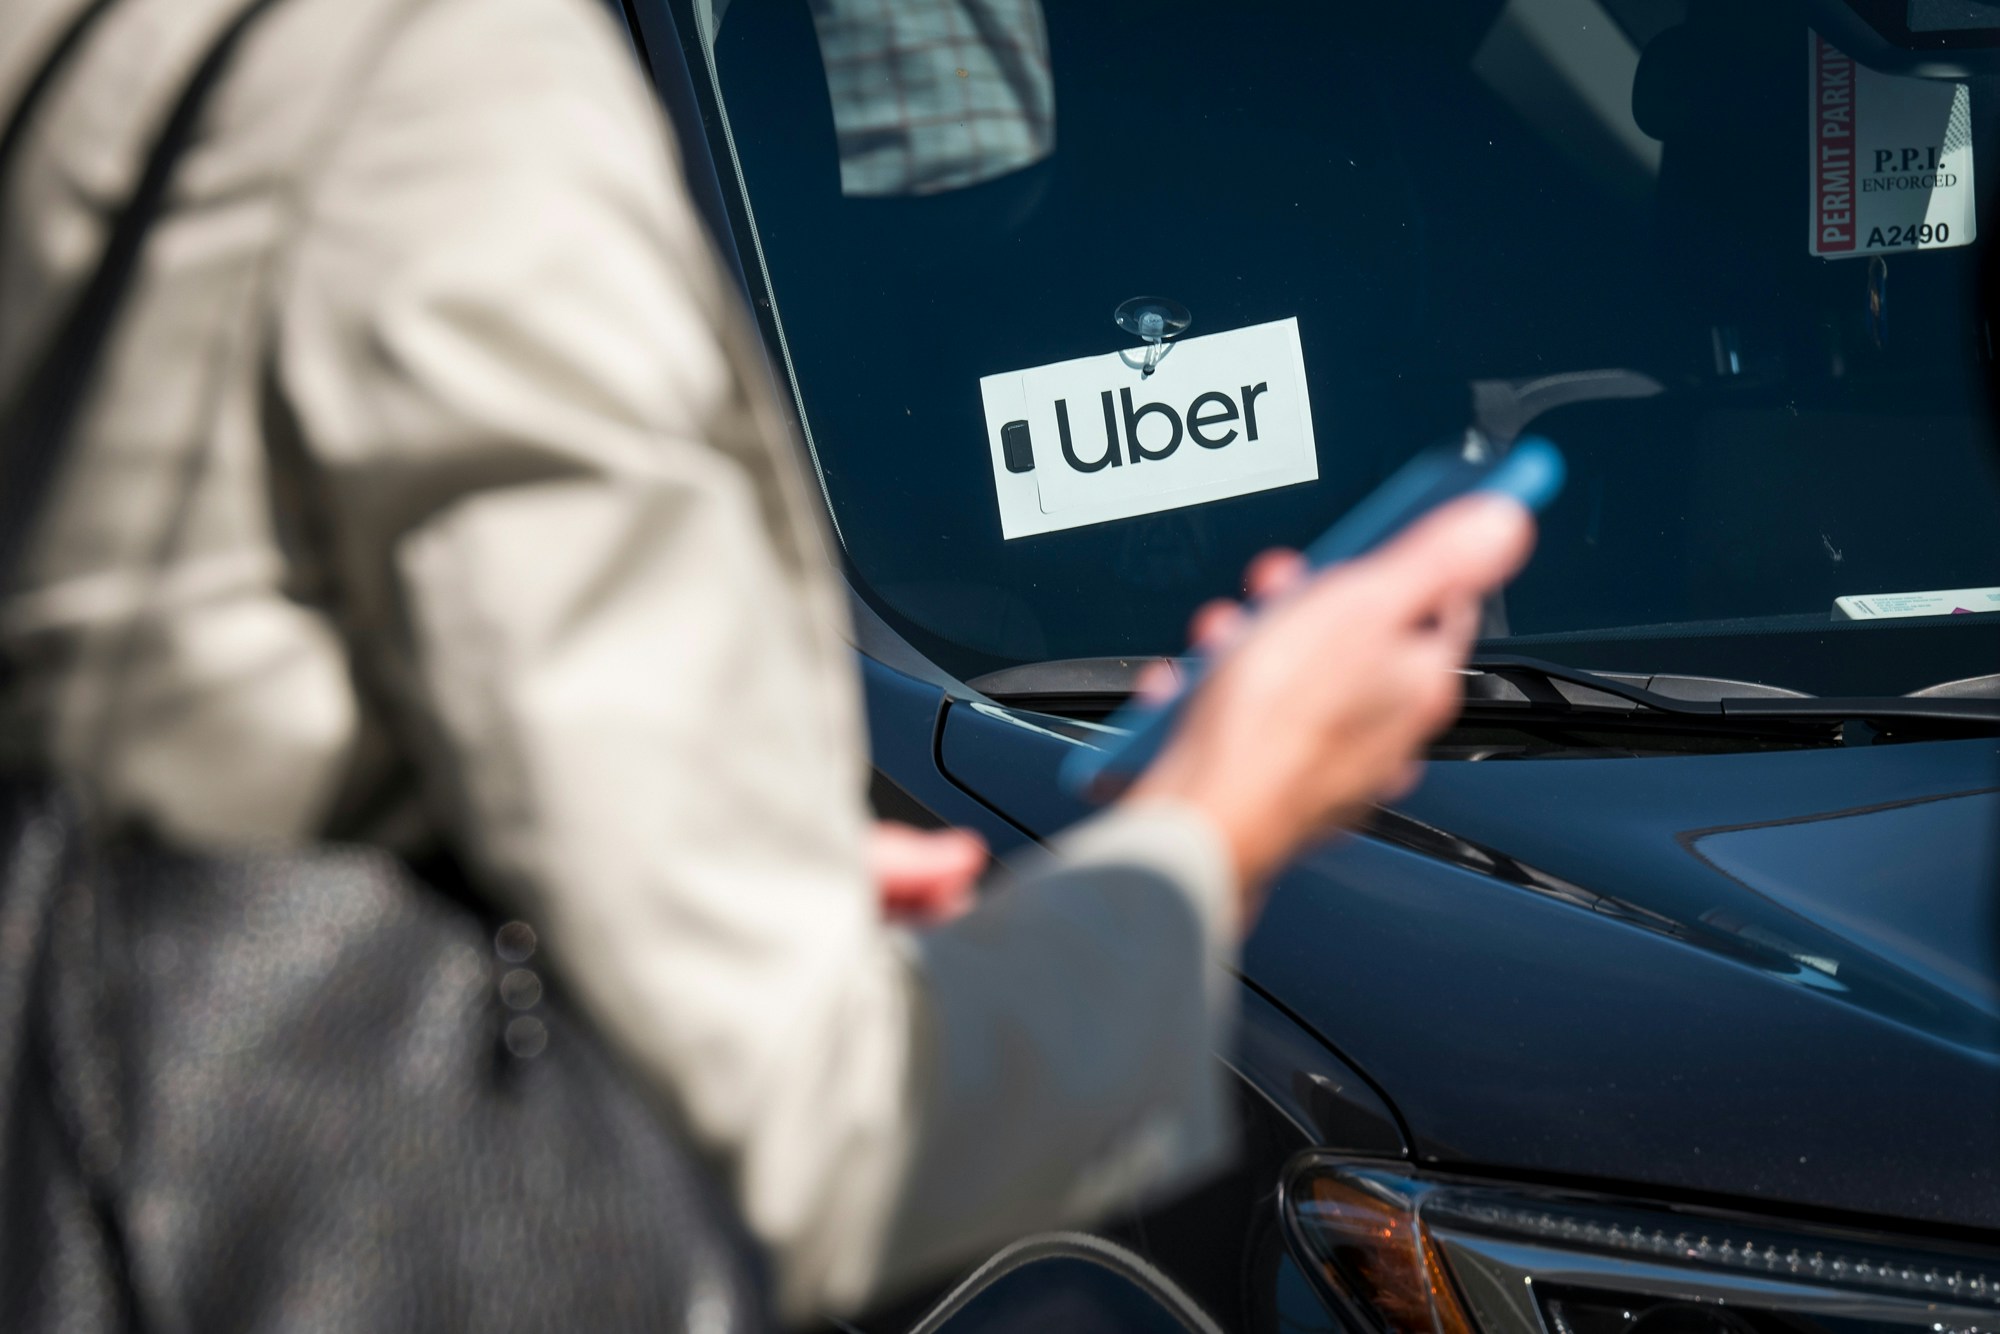 A traveler uses a smartphone in front of a vehicle displaying Uber Technologies Inc. signage at the Oakland International Airport in Oakland, California, U.S., on Tuesday, Aug. 6, 2019. Uber Technologies Inc. is scheduled to release earnings figures on August 8. Photographer: David Paul Morris/Bloomberg via Getty Images